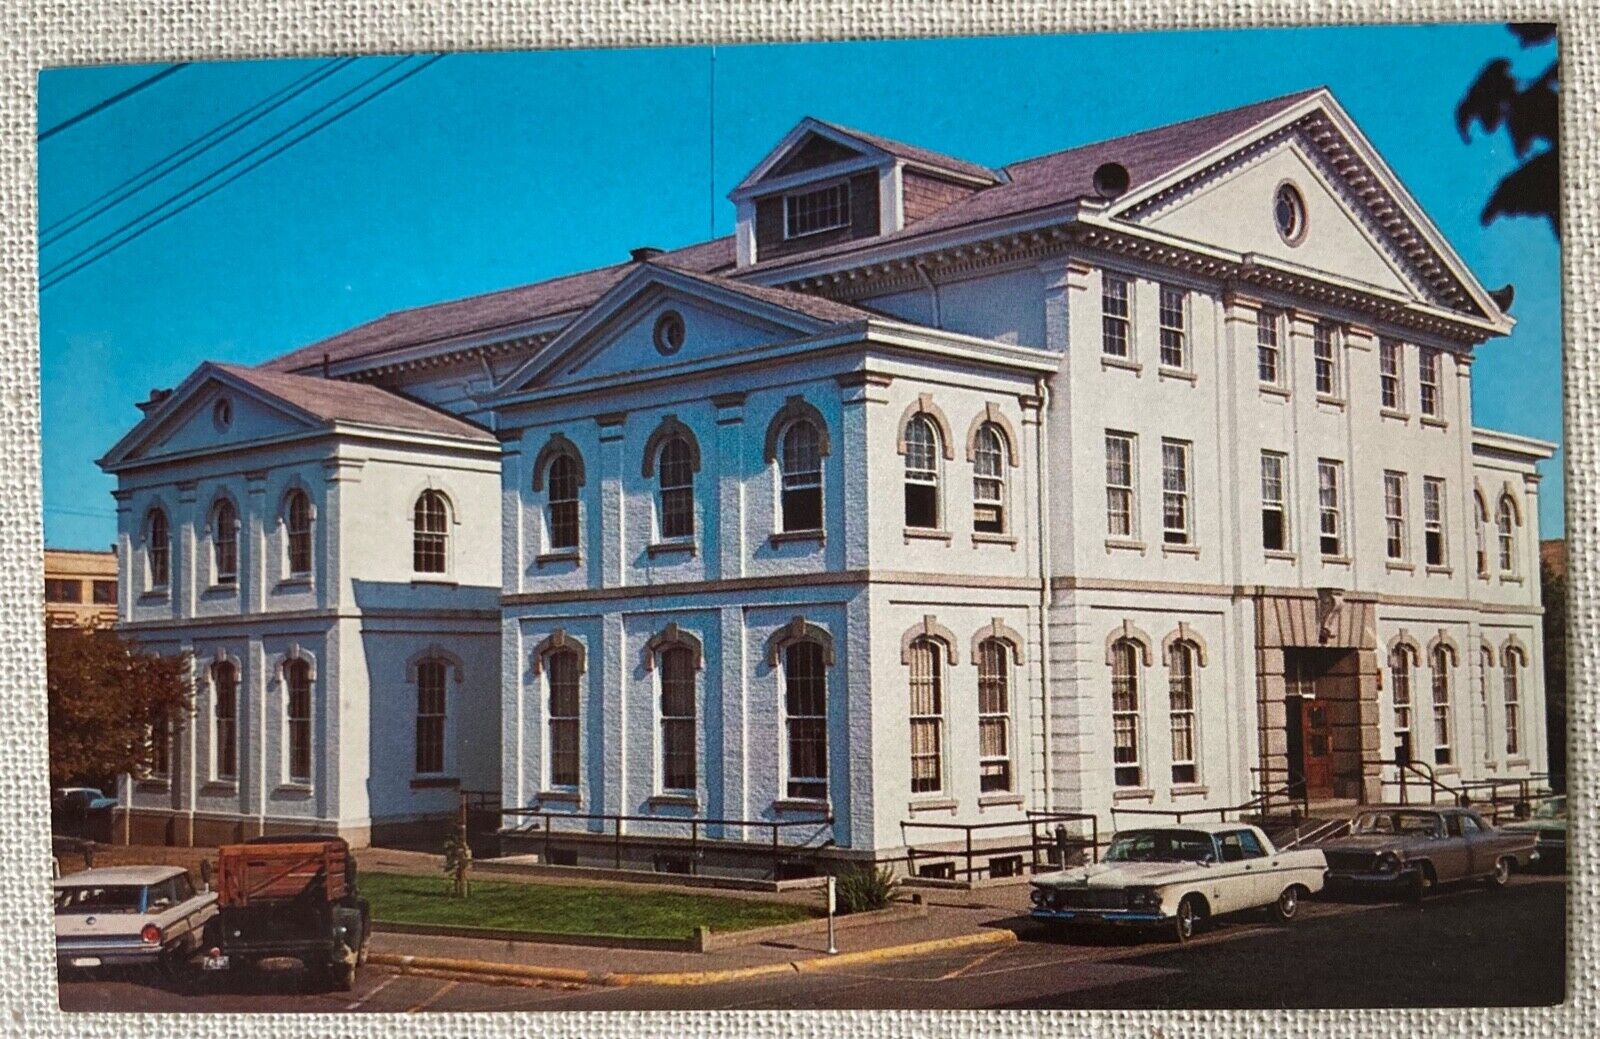 Union County Court House Morganfield Kentucky Vintage Cars Postcard